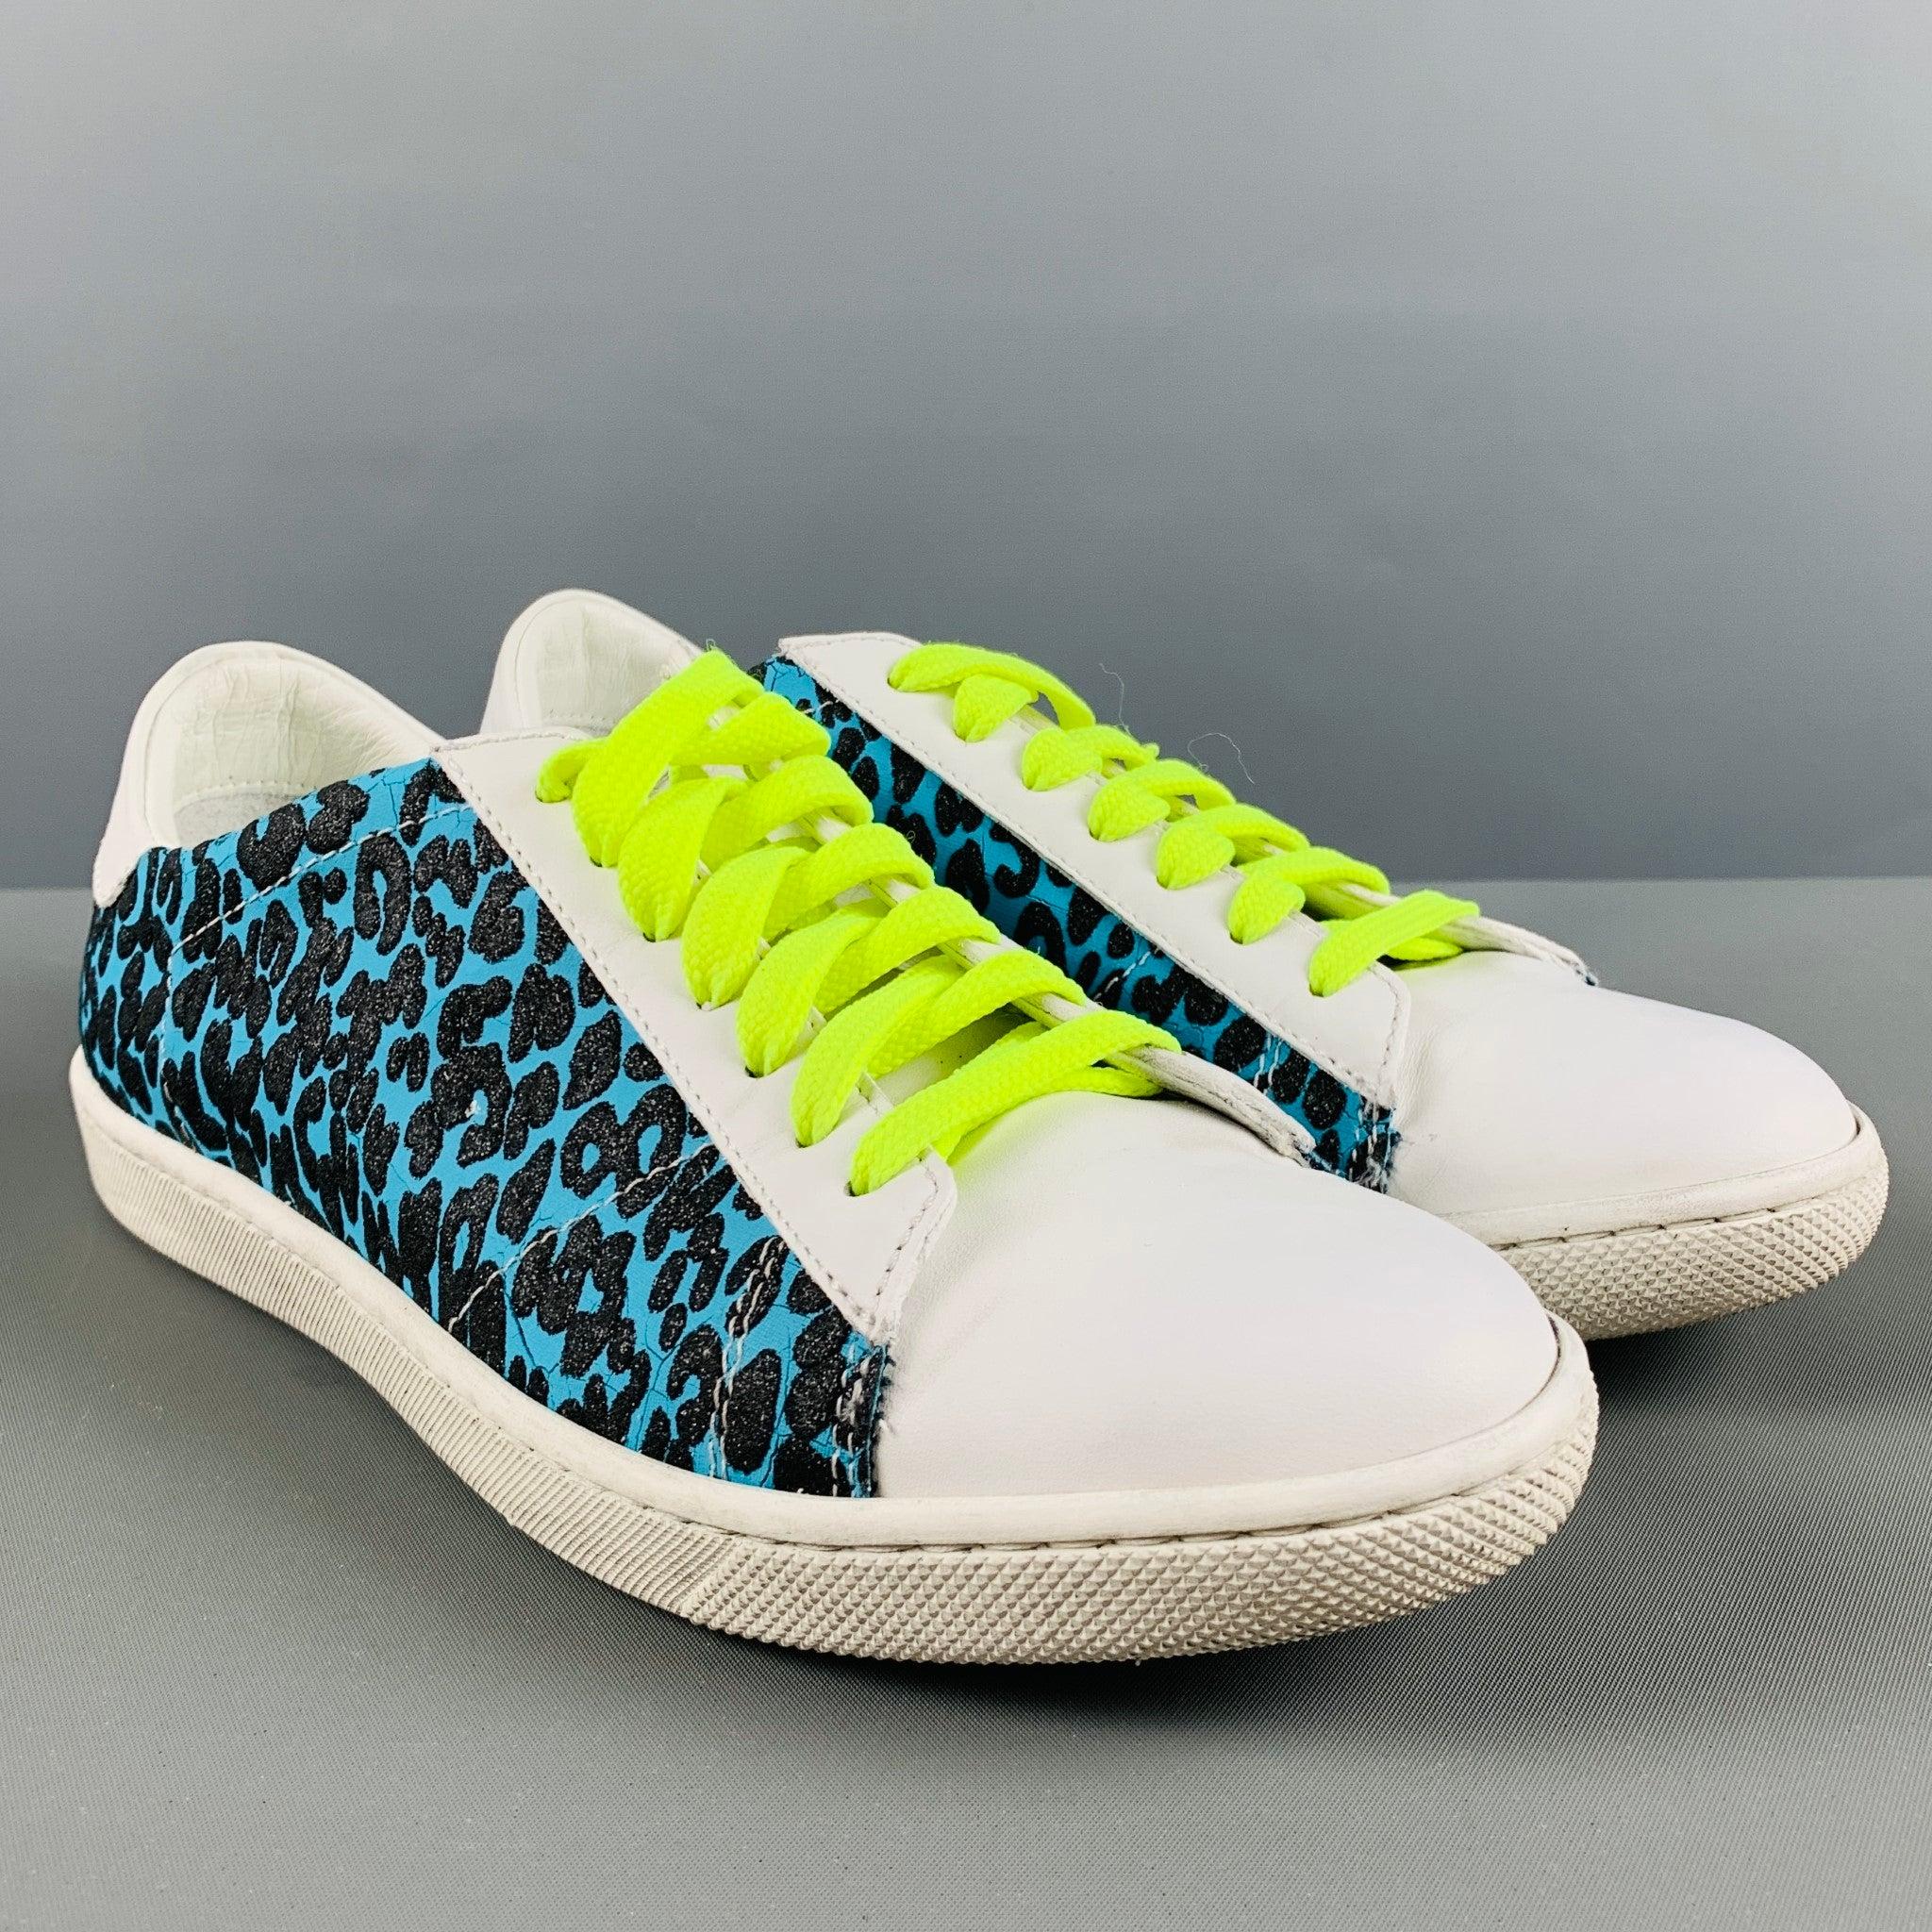 AMIRI sneakers comes in a black, white and blue leather featuring a low-top style, animal print texture, and a neon lace up closure. Comes with Box. Made in Italy.Very Good Pre-Owned Condition.  

Marked:   37Outsole: 10.5 inches  x 3.5 inches 
  
 